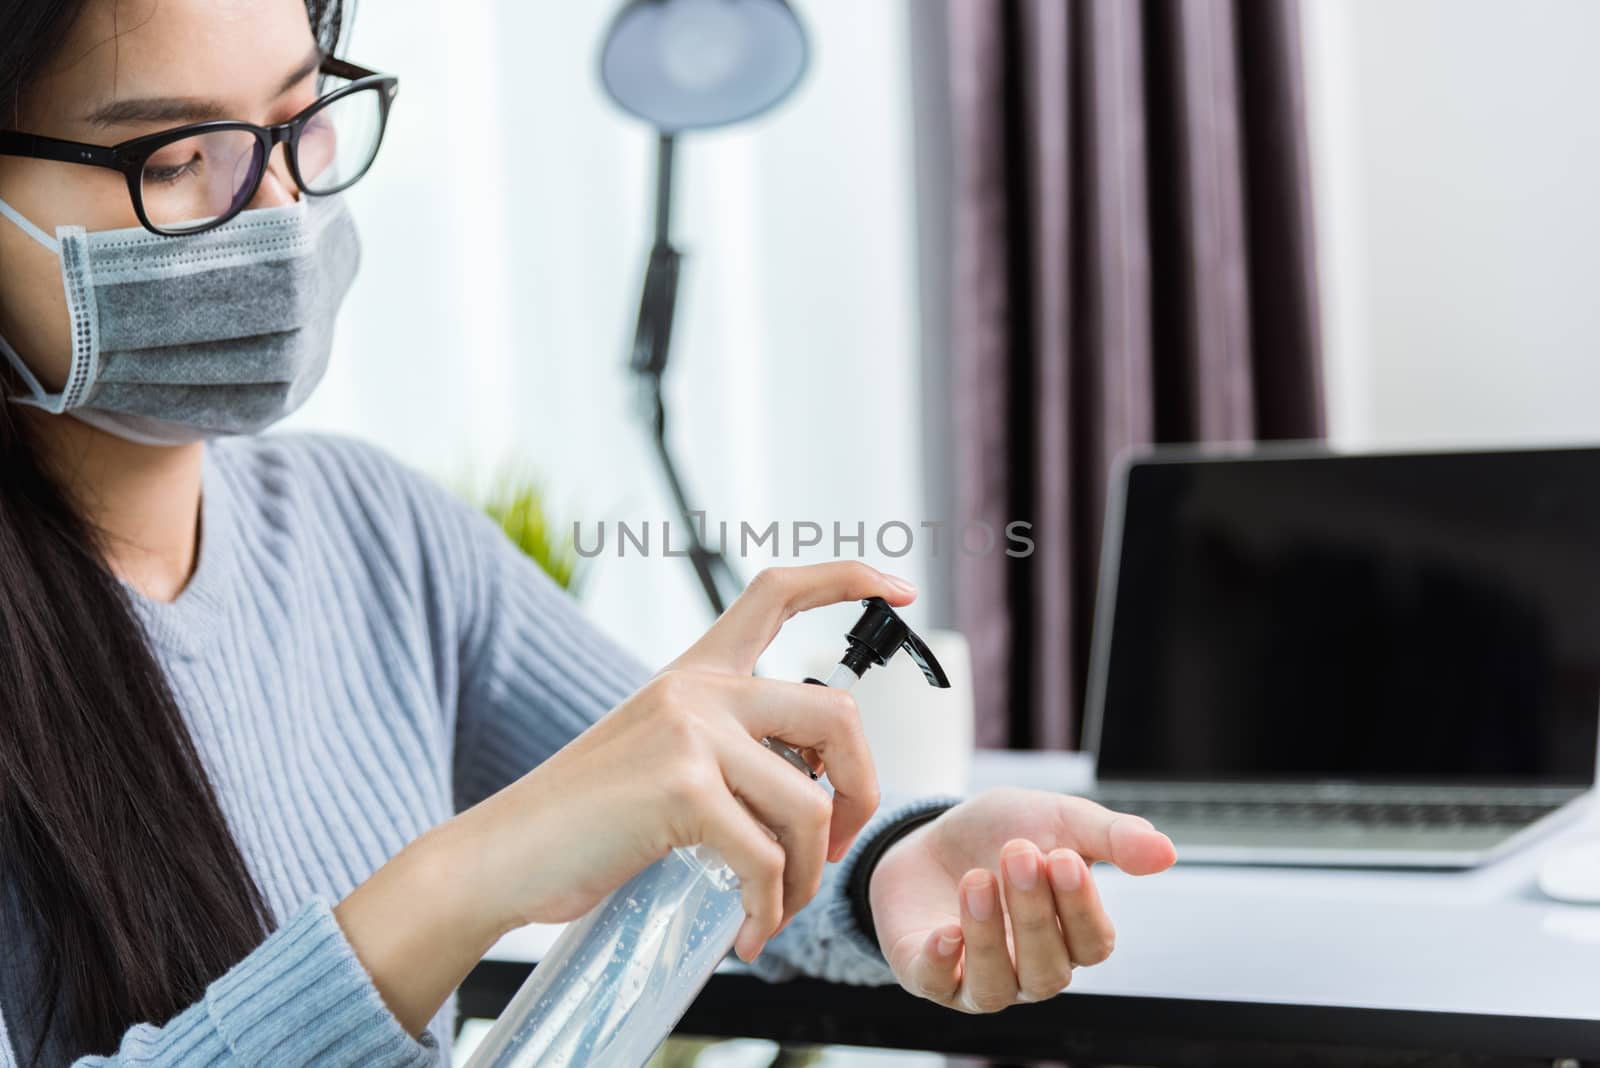 Asian young business beautiful woman wearing face mask protective working from home office with laptop computer desk he quarantines disease coronavirus and cleaning hands by sanitizer alcohol gel pump